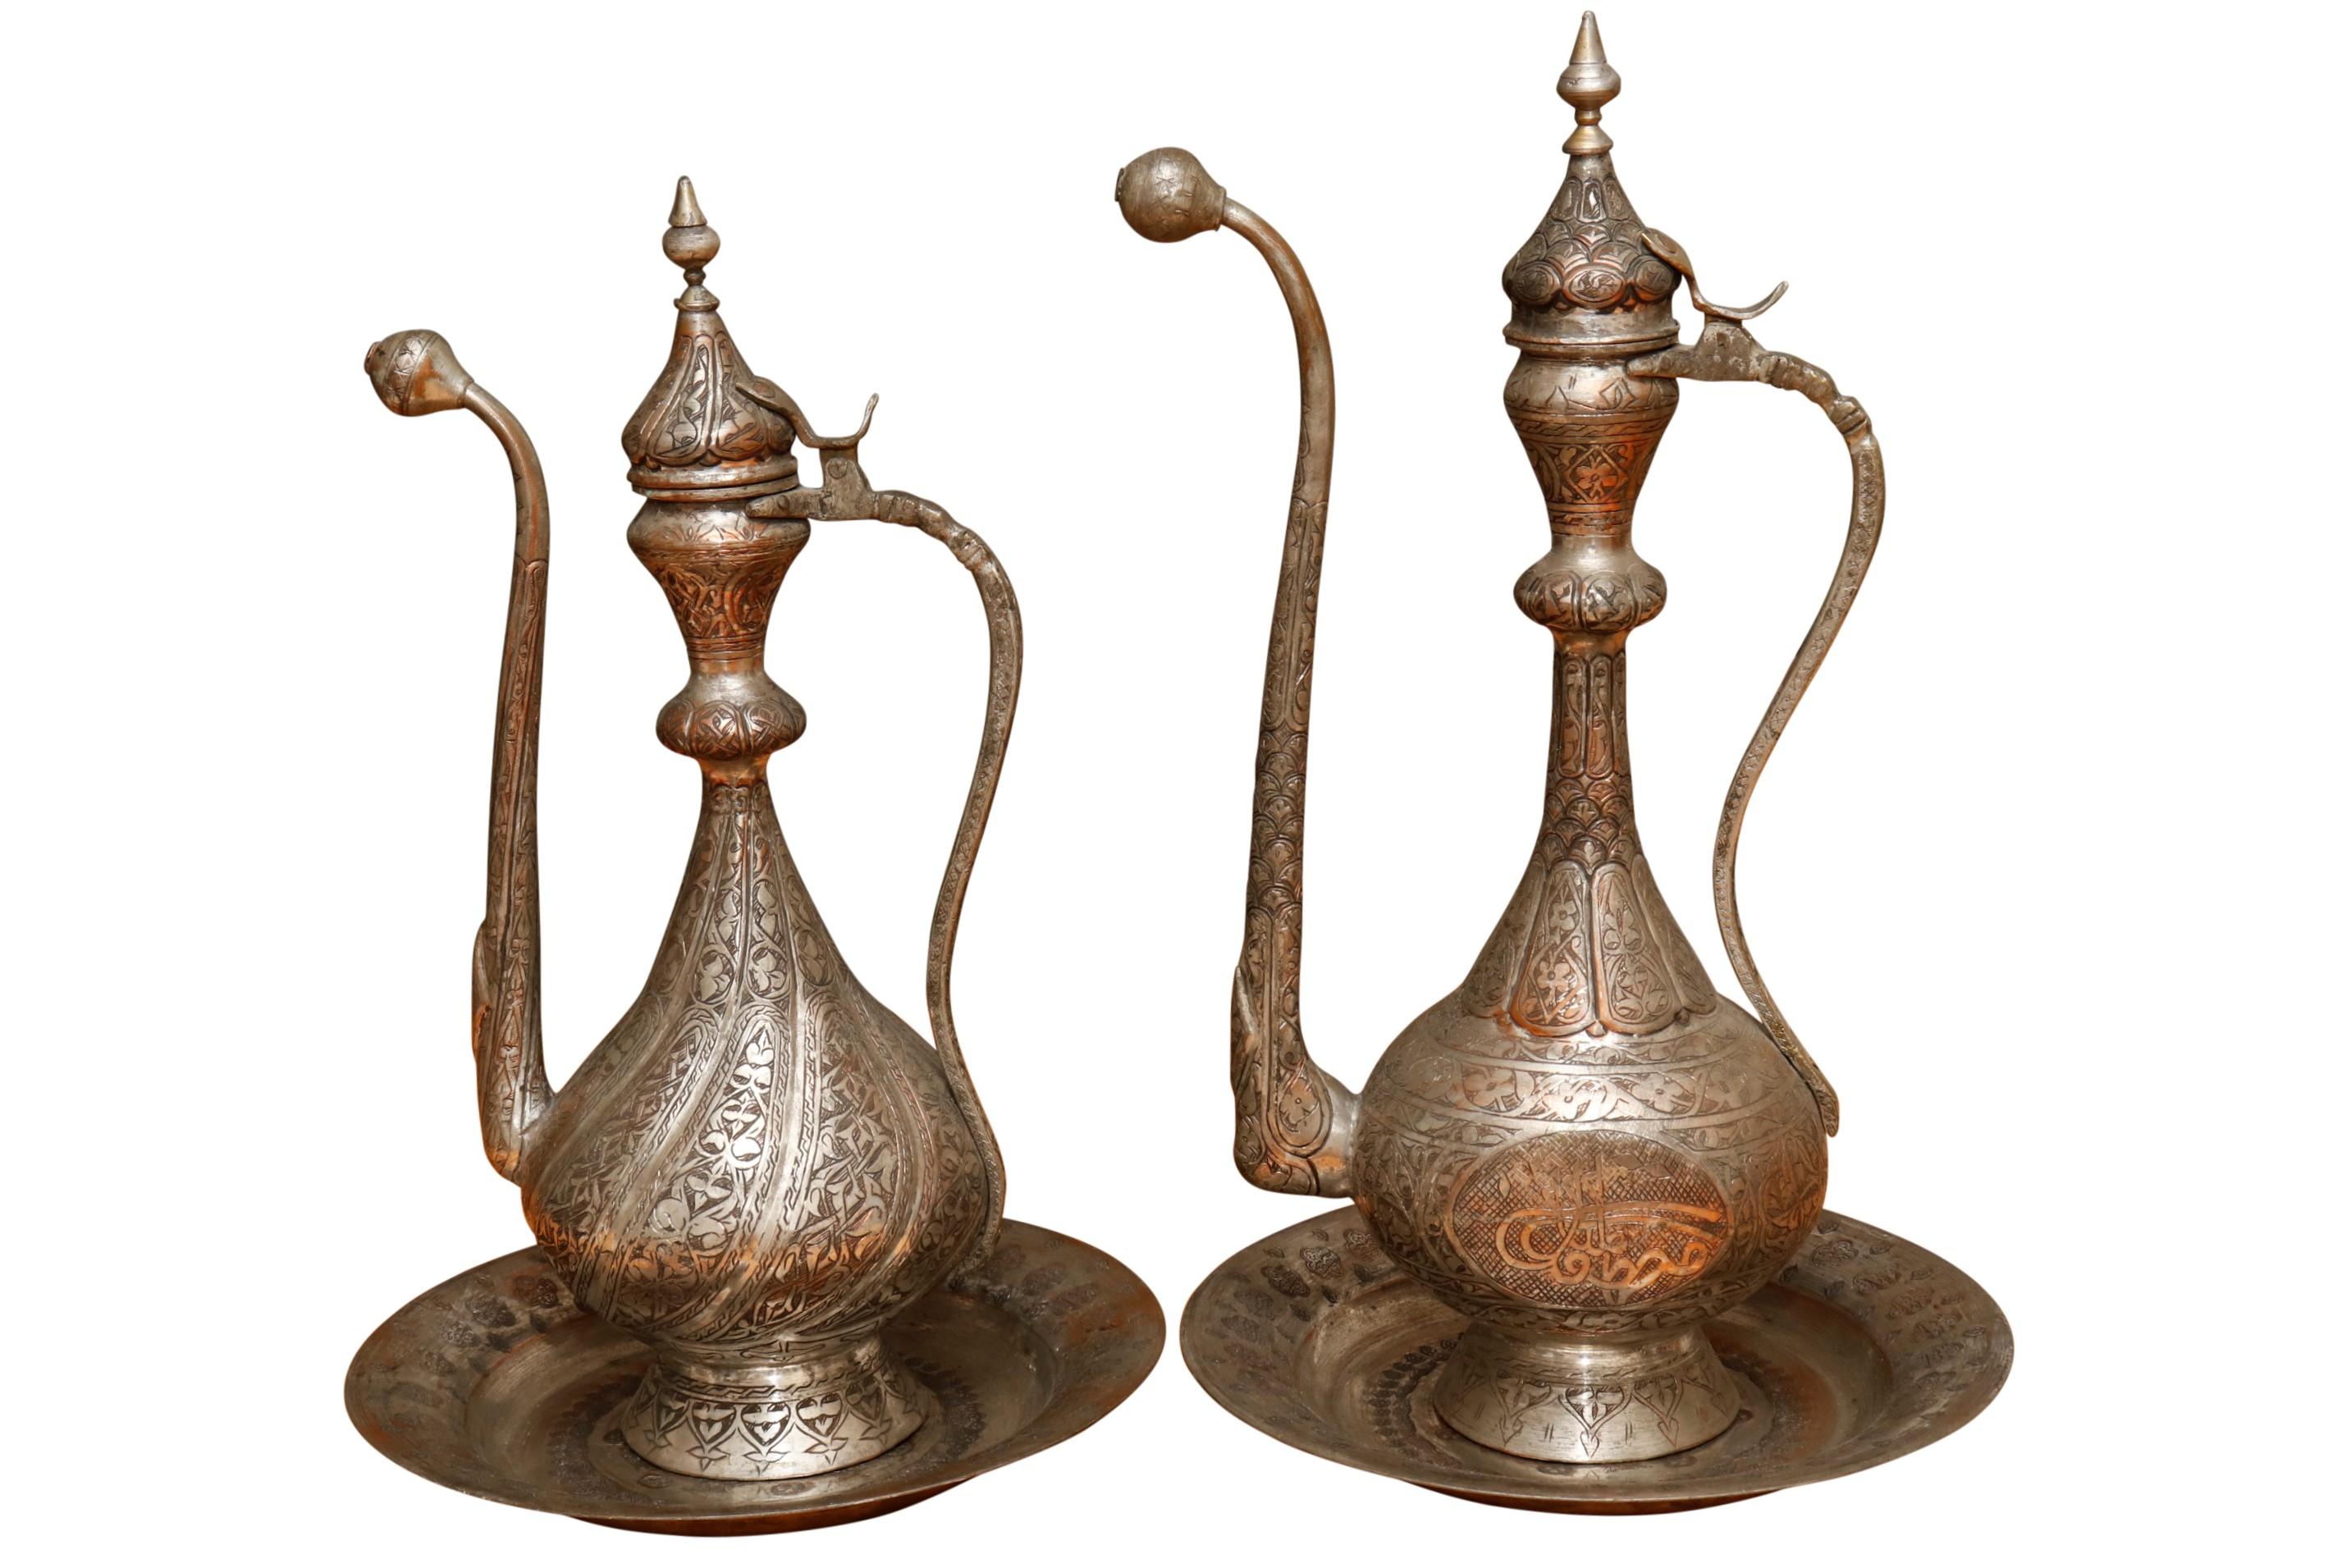 A near pair of large Middle Eastern silver plated copper ewers with matching plates. Tall ewers and plates are ornately engraved throughout with a vine like motif. Ewers measure 12